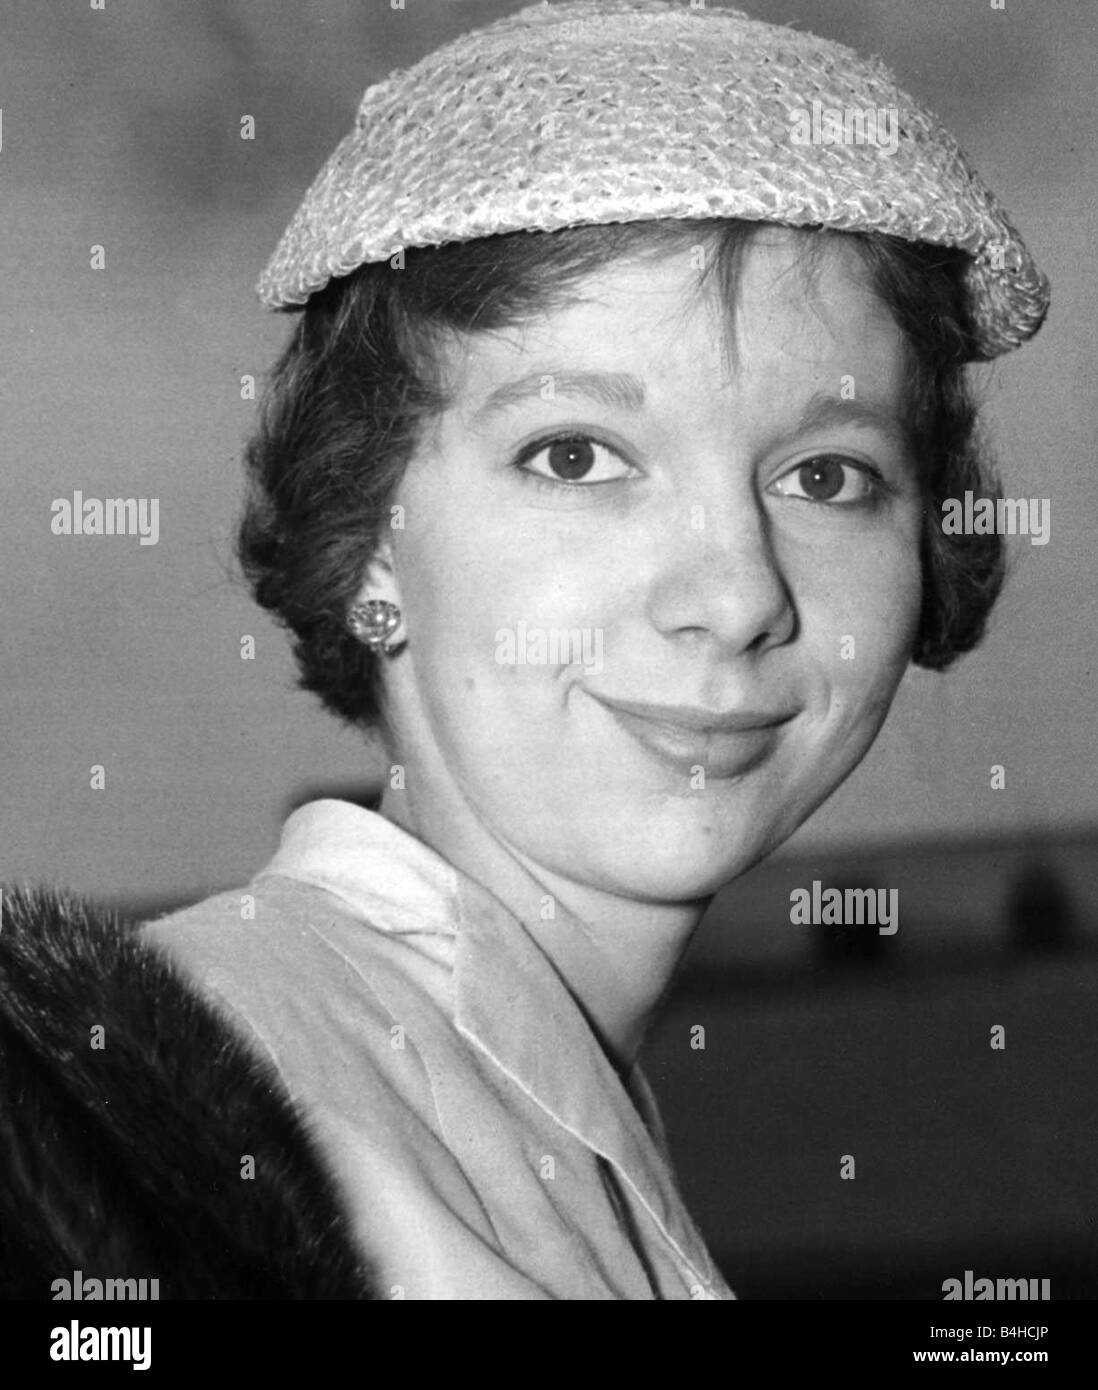 Actress Anna Massey seen here arriving at Royal Ascot wearing a straw hat June 1956 Stock Photo